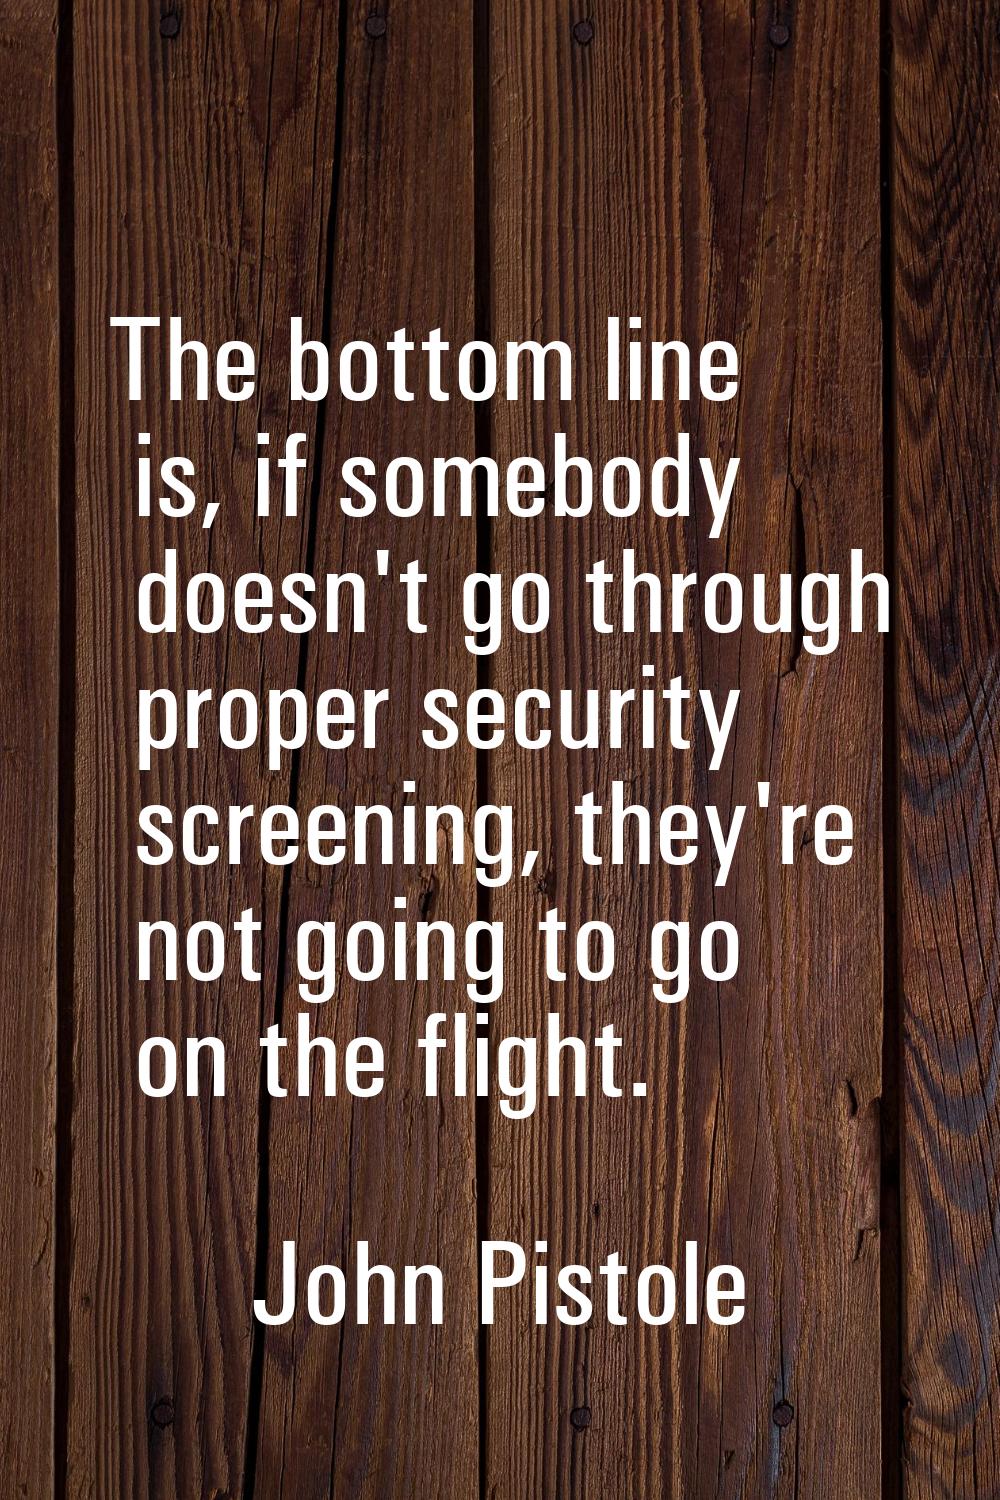 The bottom line is, if somebody doesn't go through proper security screening, they're not going to 